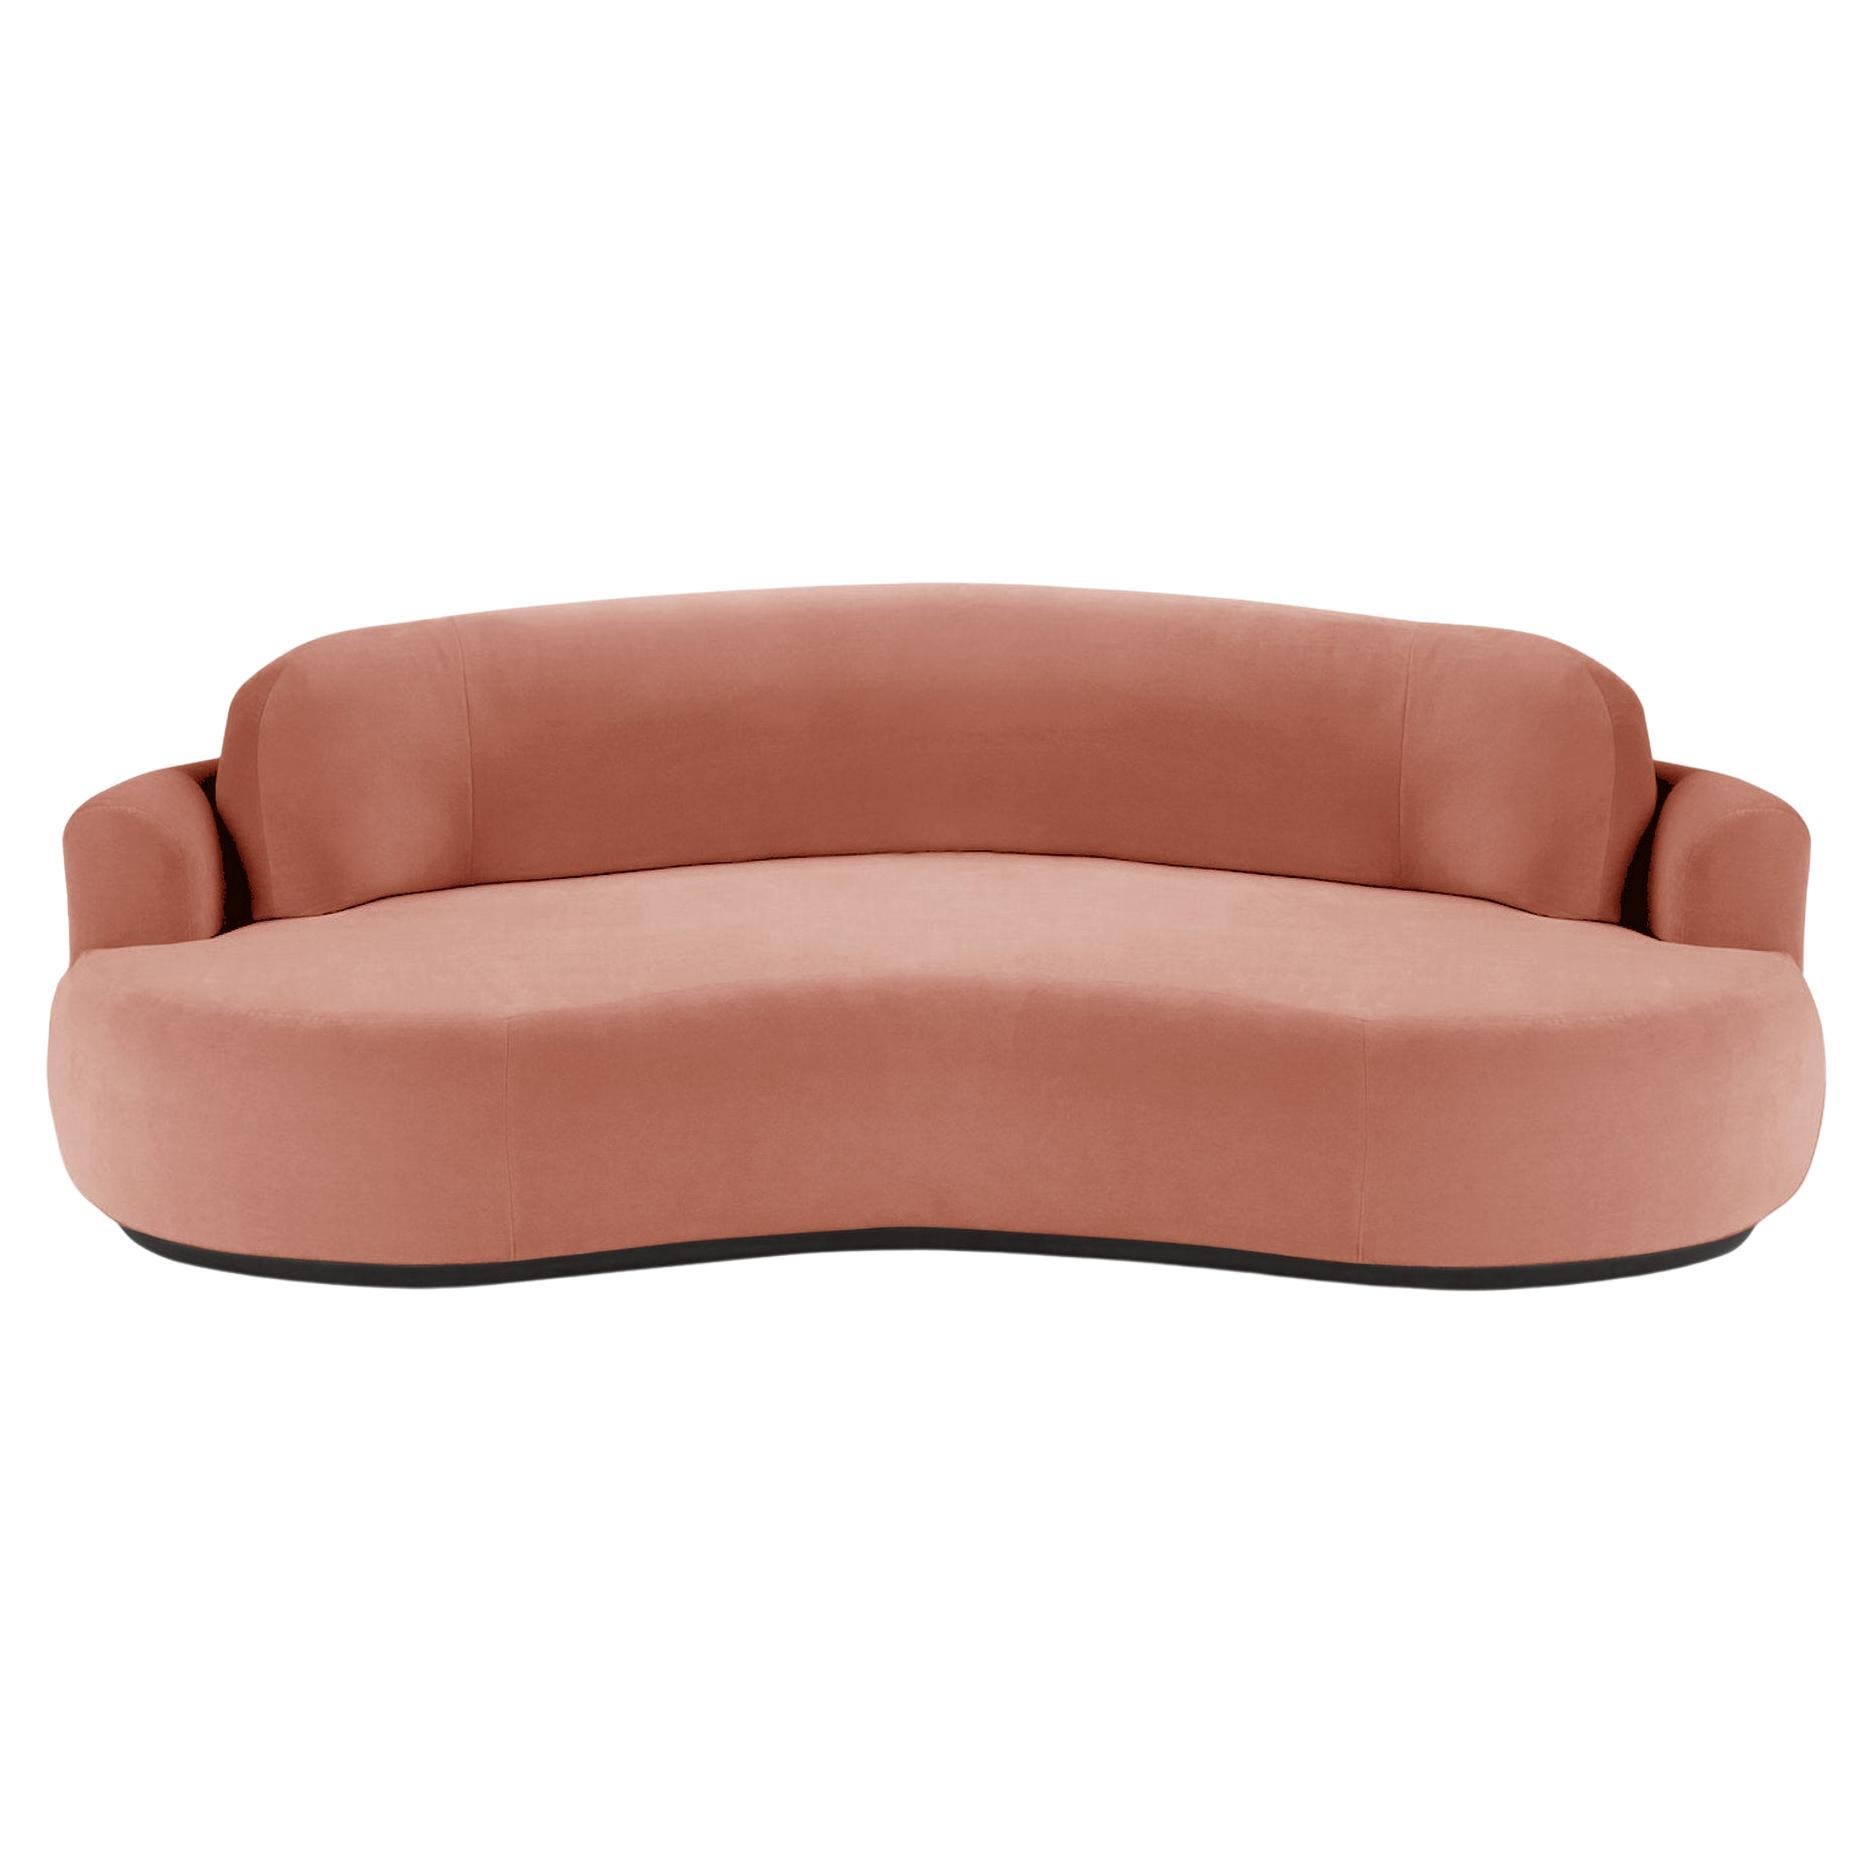 Naked Round Sofa, Medium with Beech Ash-056-5 and Paris Brick For Sale